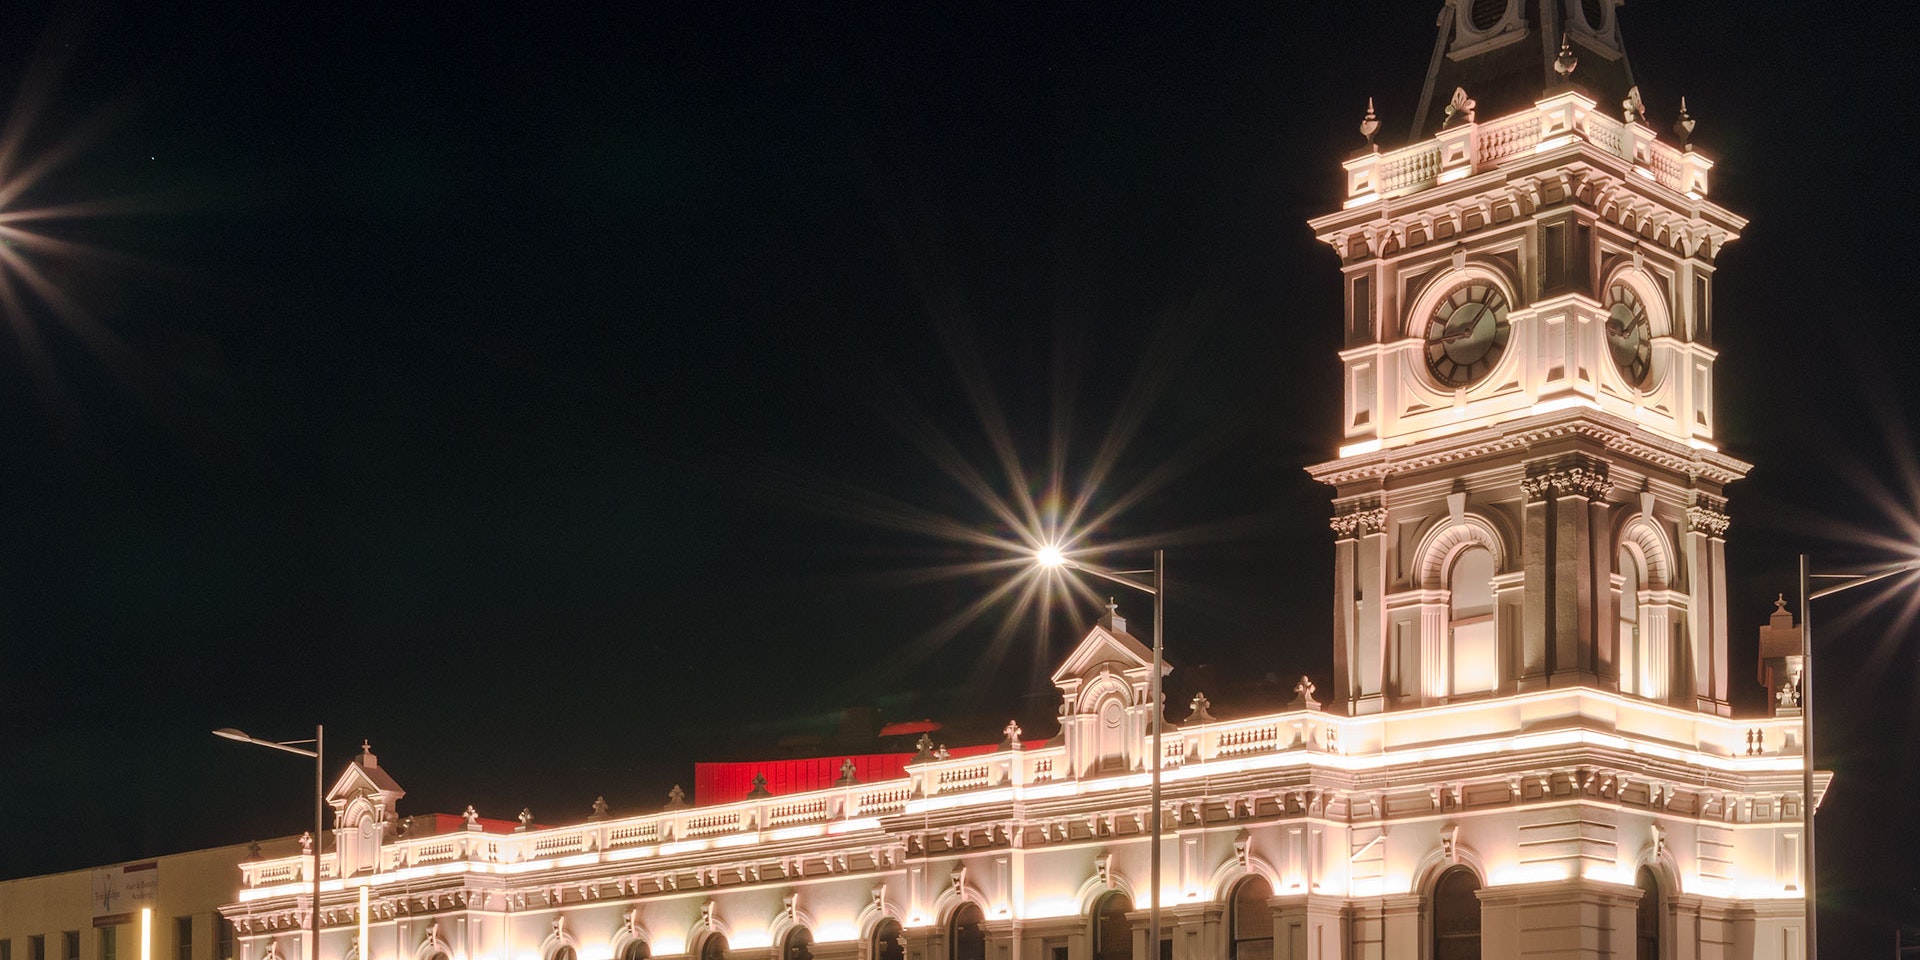 Latitude LED luminaire in application, installed on the façade of the former Dandenong Town Hall, now known as the Drum Theatre in Melbourne. Night view.